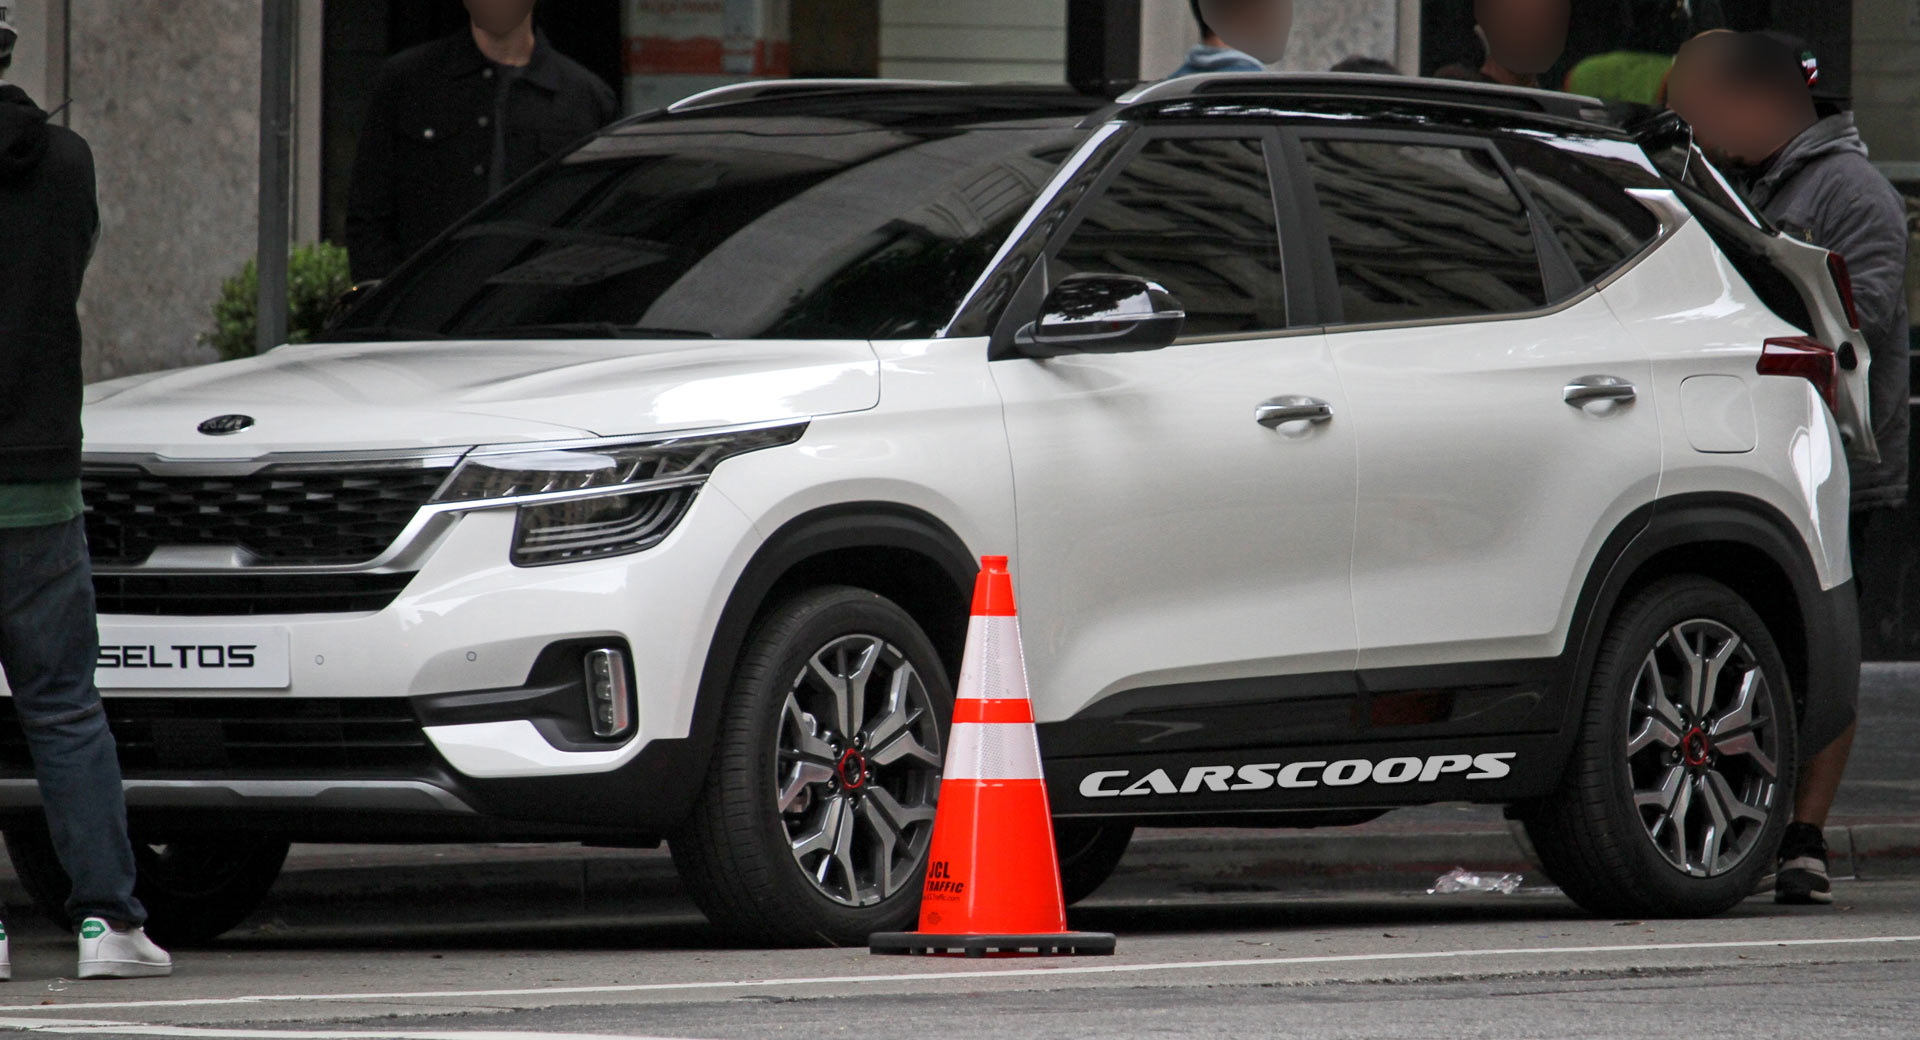 This Is The Kia Seltos, The Firm's Small SUV | Carscoops